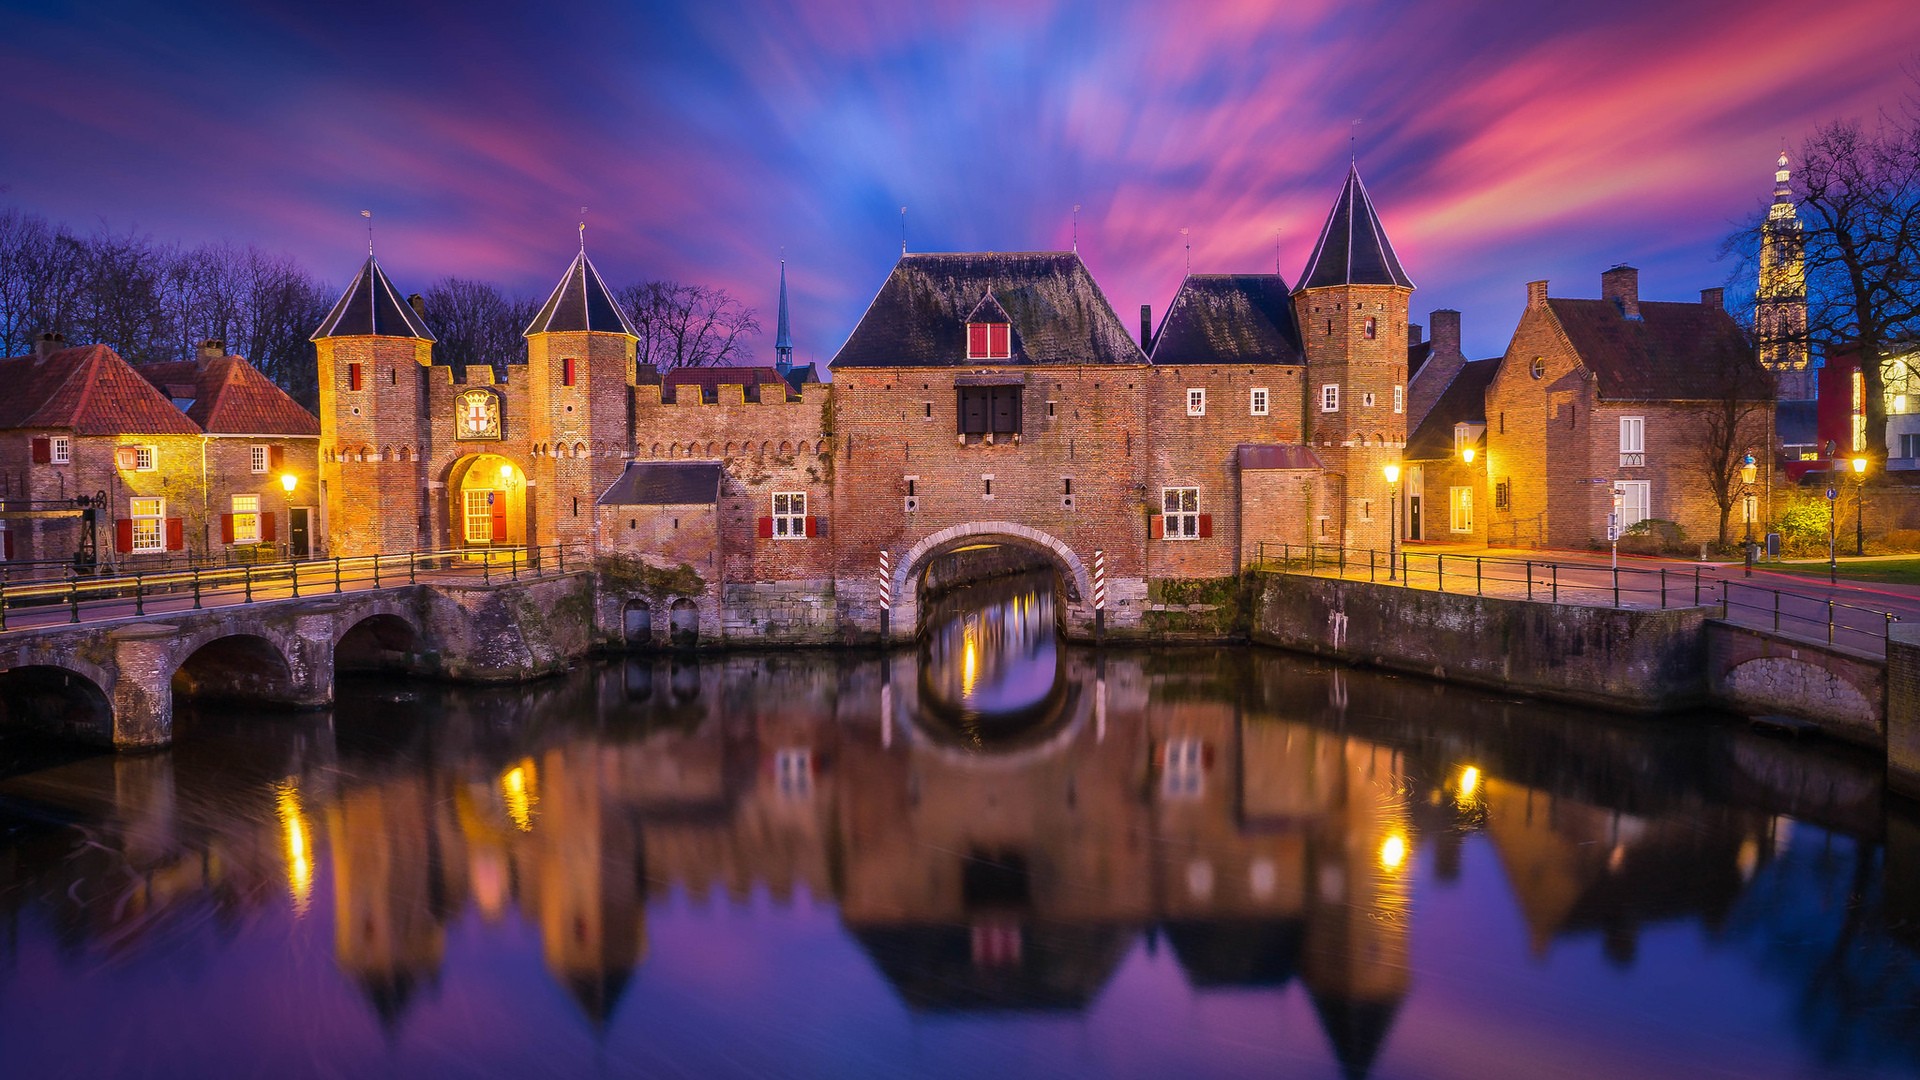 General 1920x1080 architecture castle clouds water reflection long exposure lights tower sunset bridge Netherlands Europe